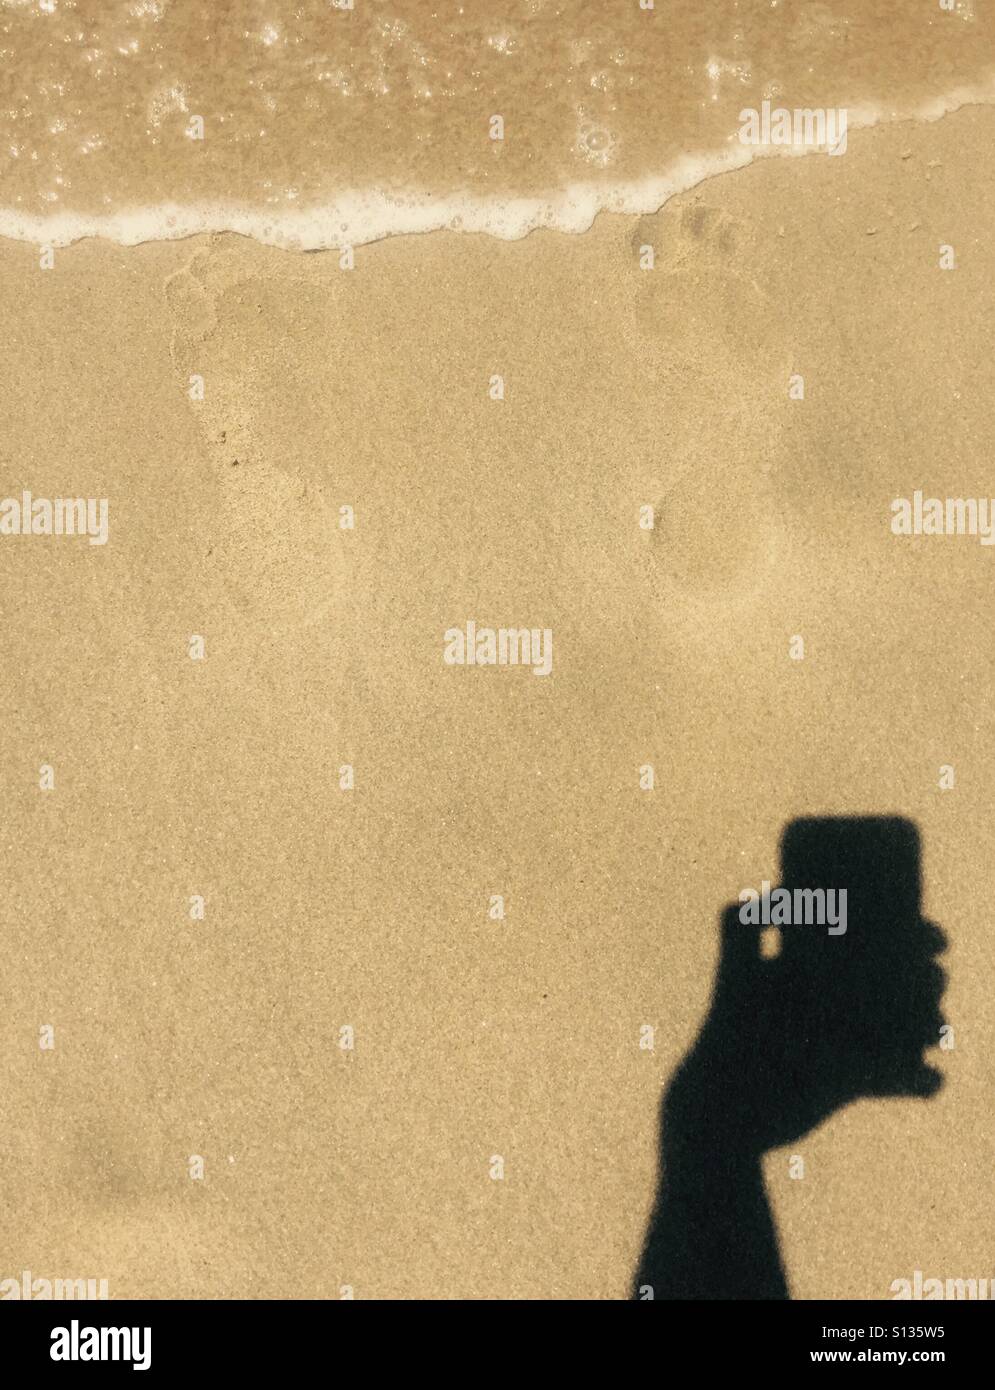 A shadow of an hand holding a phone taking a photo of some footprints in the sand. Stock Photo